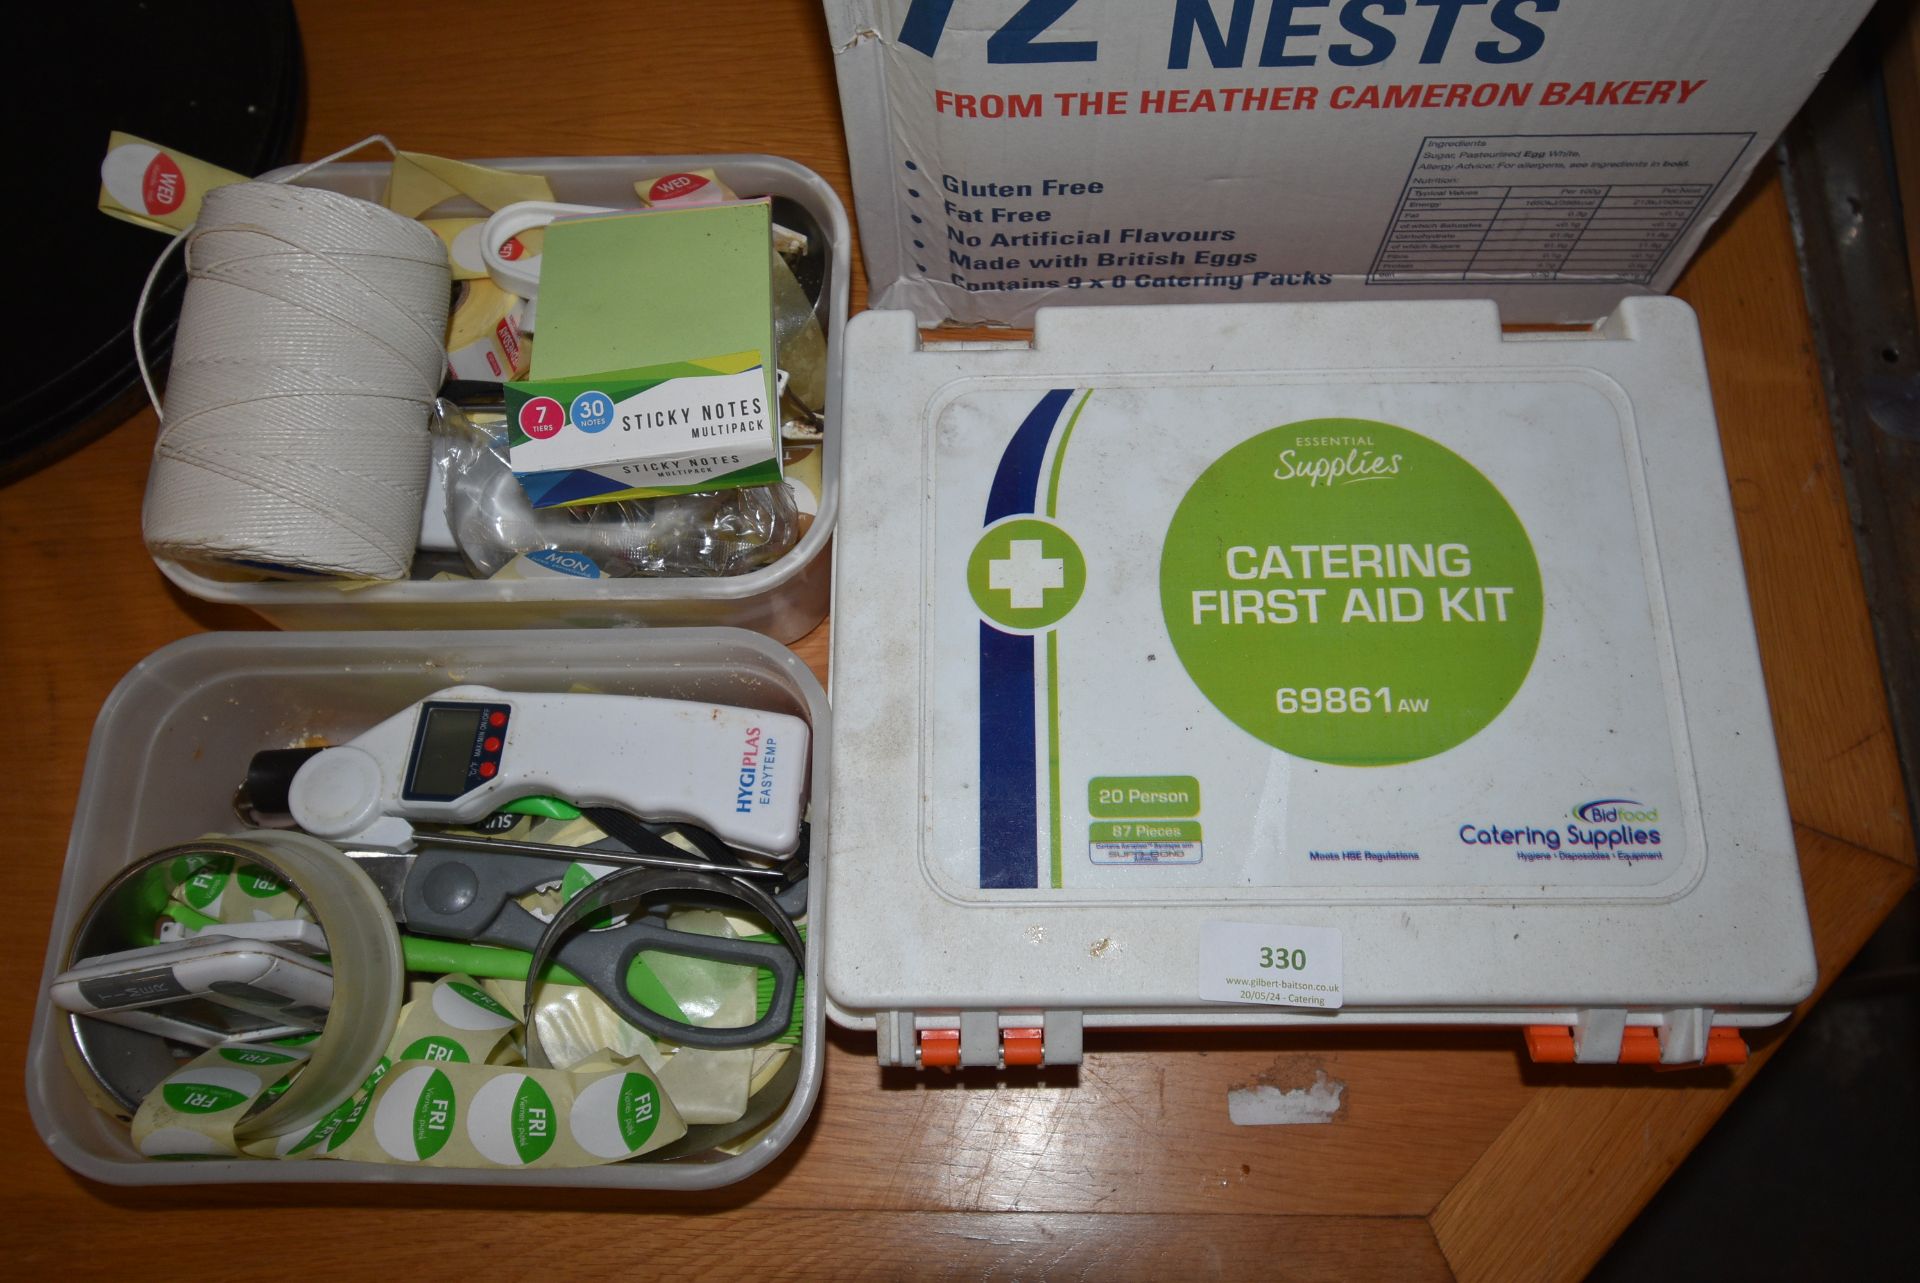 Mixed Lot Including Catering First Aid Kit, Sticky Notes, etc. - Image 2 of 2